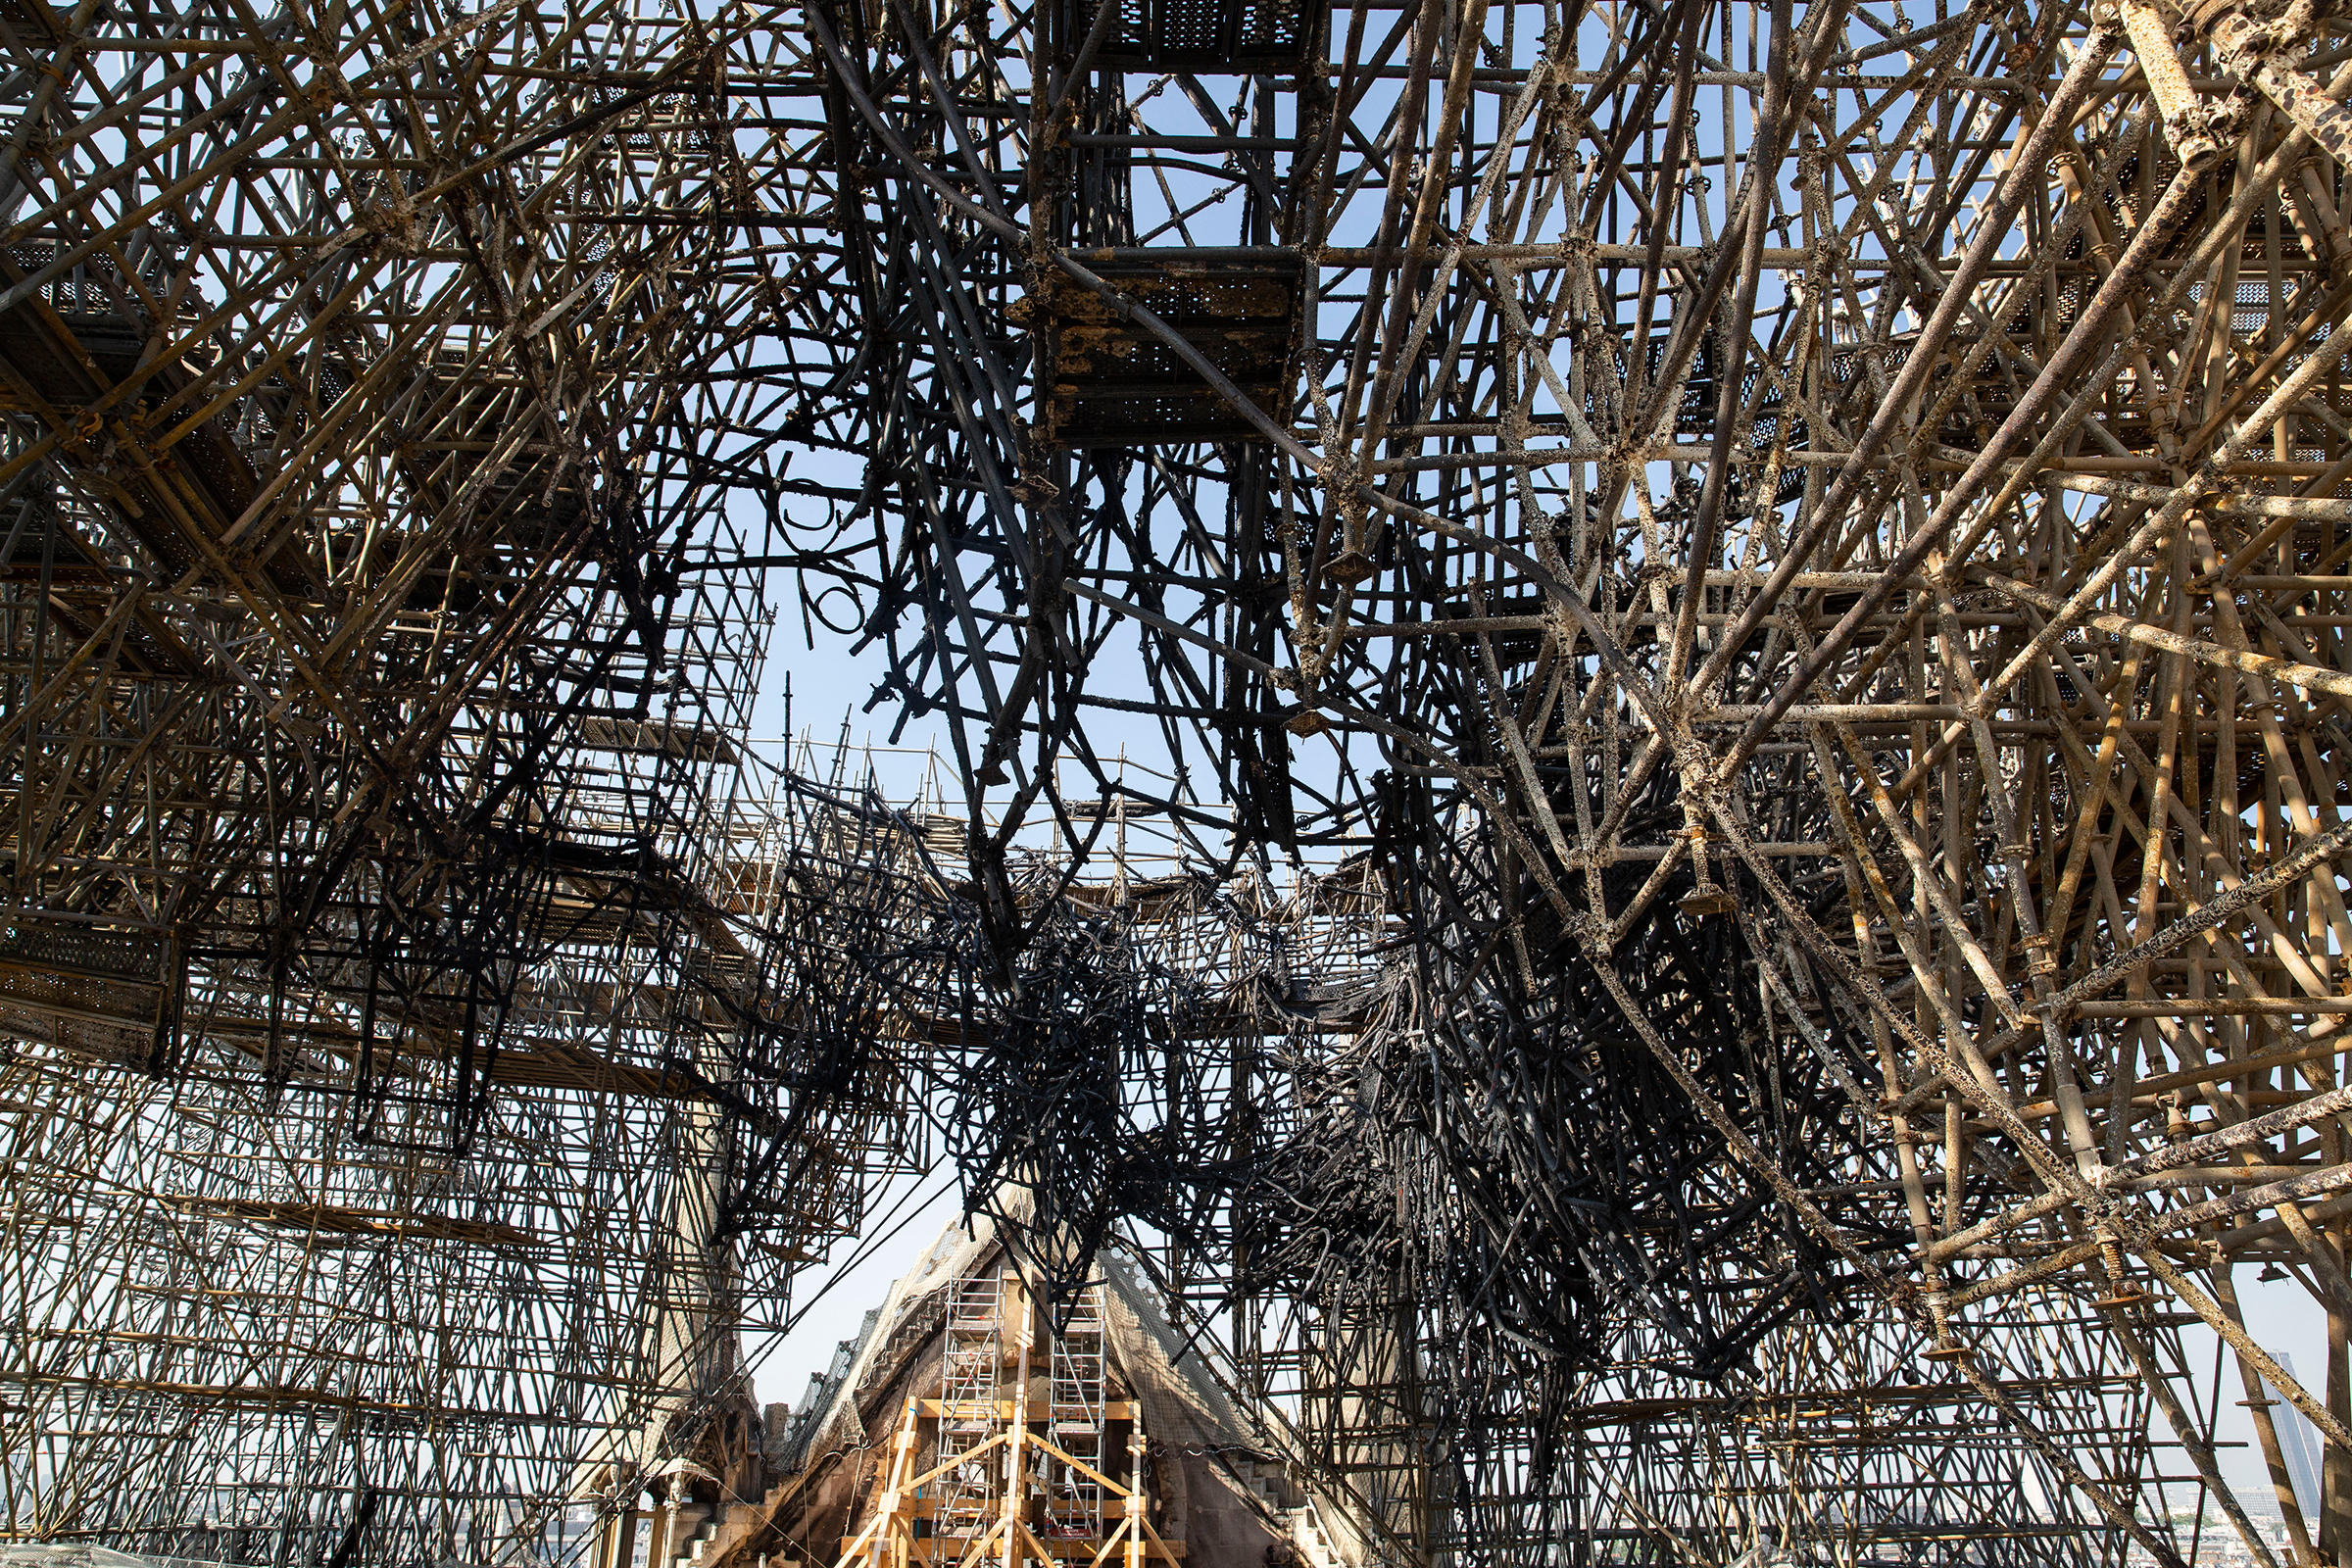 Much of the roof’s frame is now just a giant tangle of molten lead. (Patrick Zachmann—Magnum Photos for TIME)